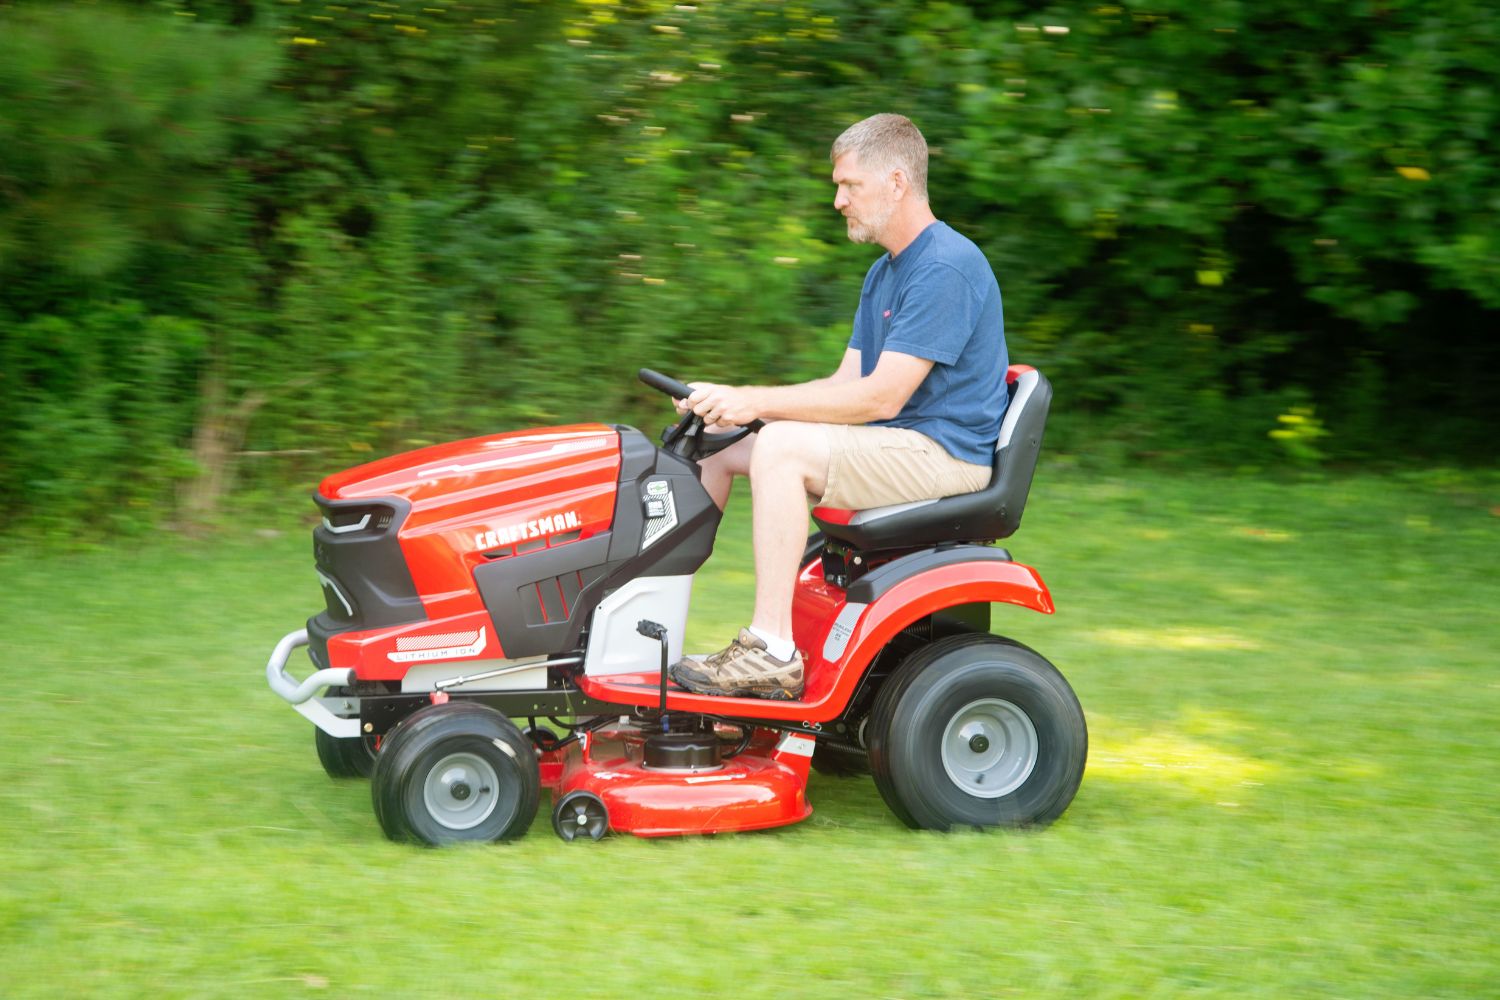 A person mowing a large lawn using the Craftsman Battery Riding mower